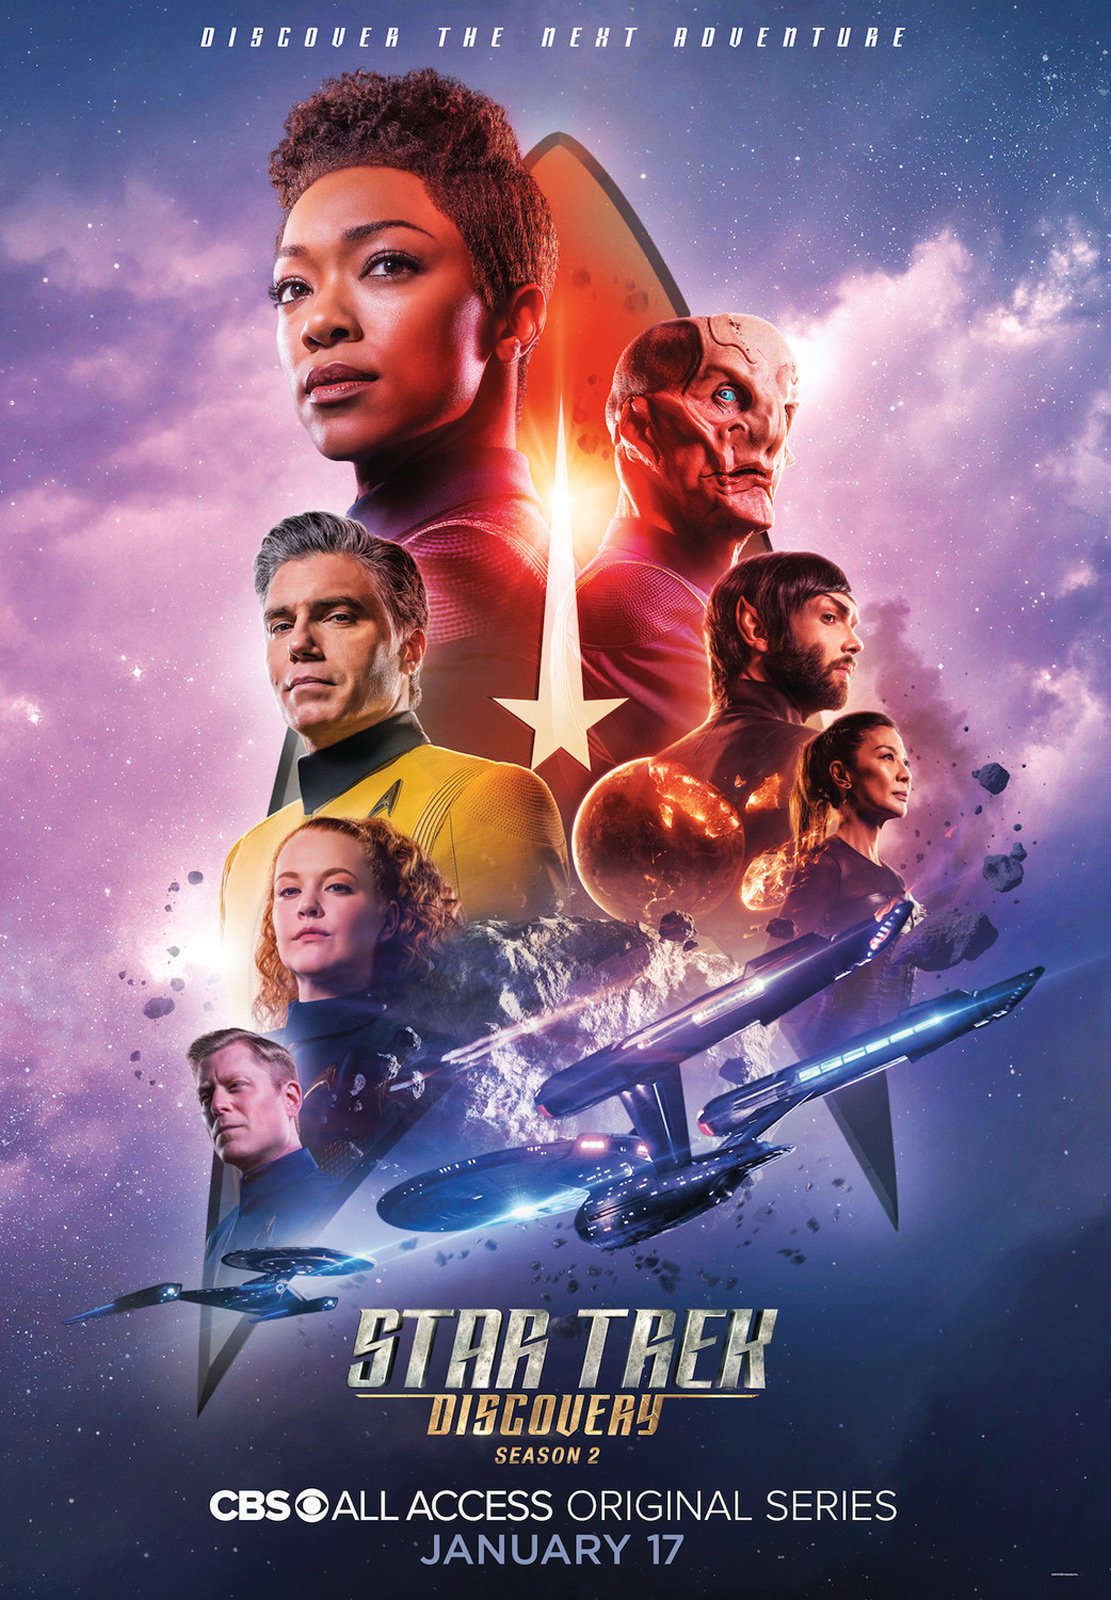 will there be a star trek discovery season 4